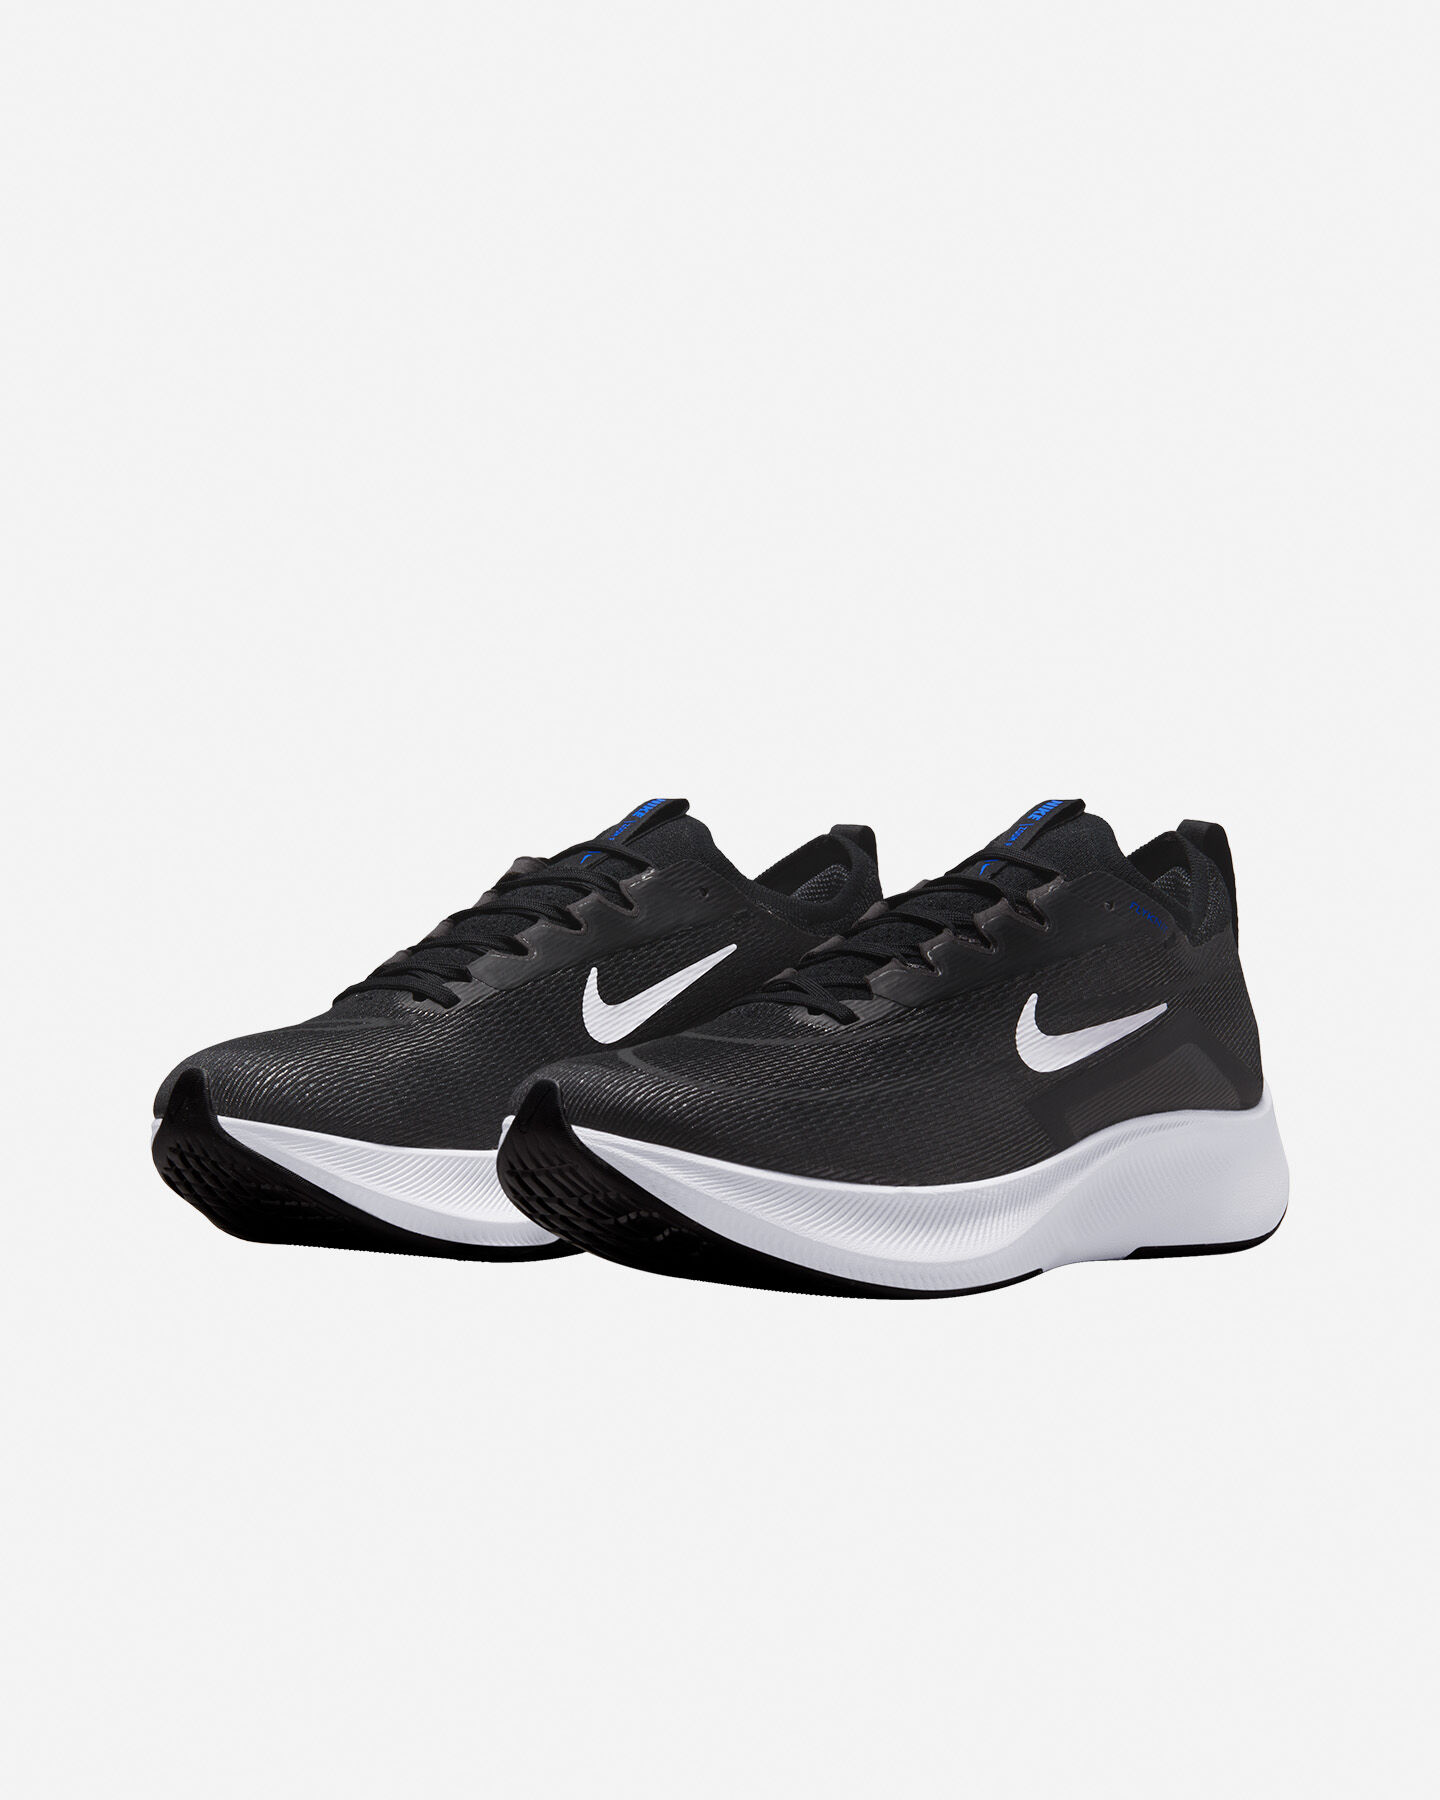  Scarpe running NIKE ZOOM FLY 4 M S5350280|001|6 scatto 1